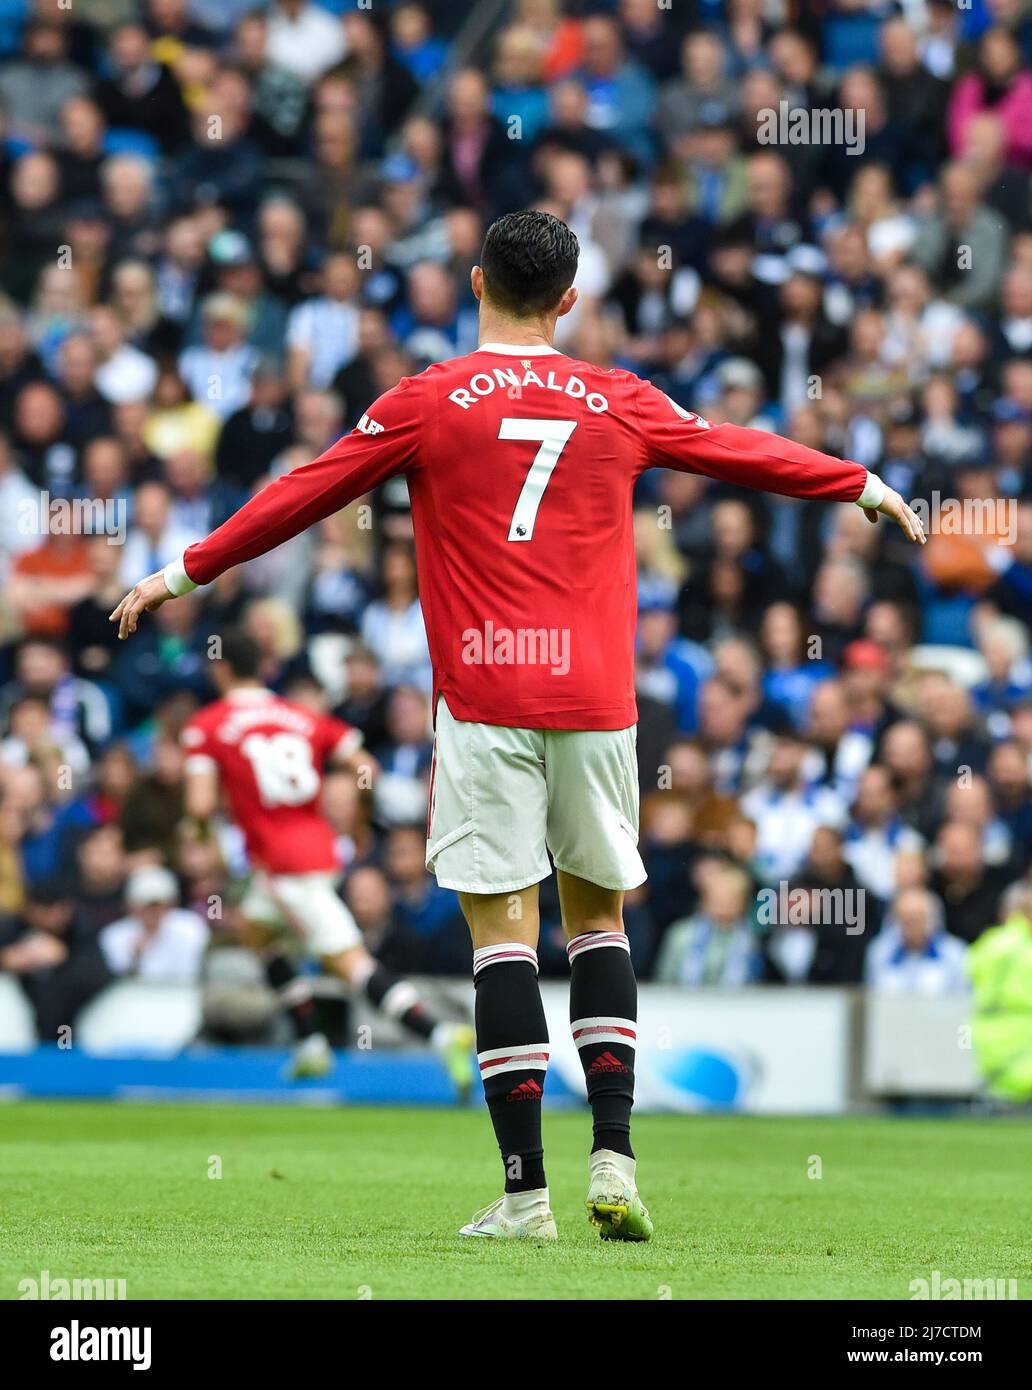 Cristiano ronaldo manchester united 7 hi-res stock photography and images -  Alamy